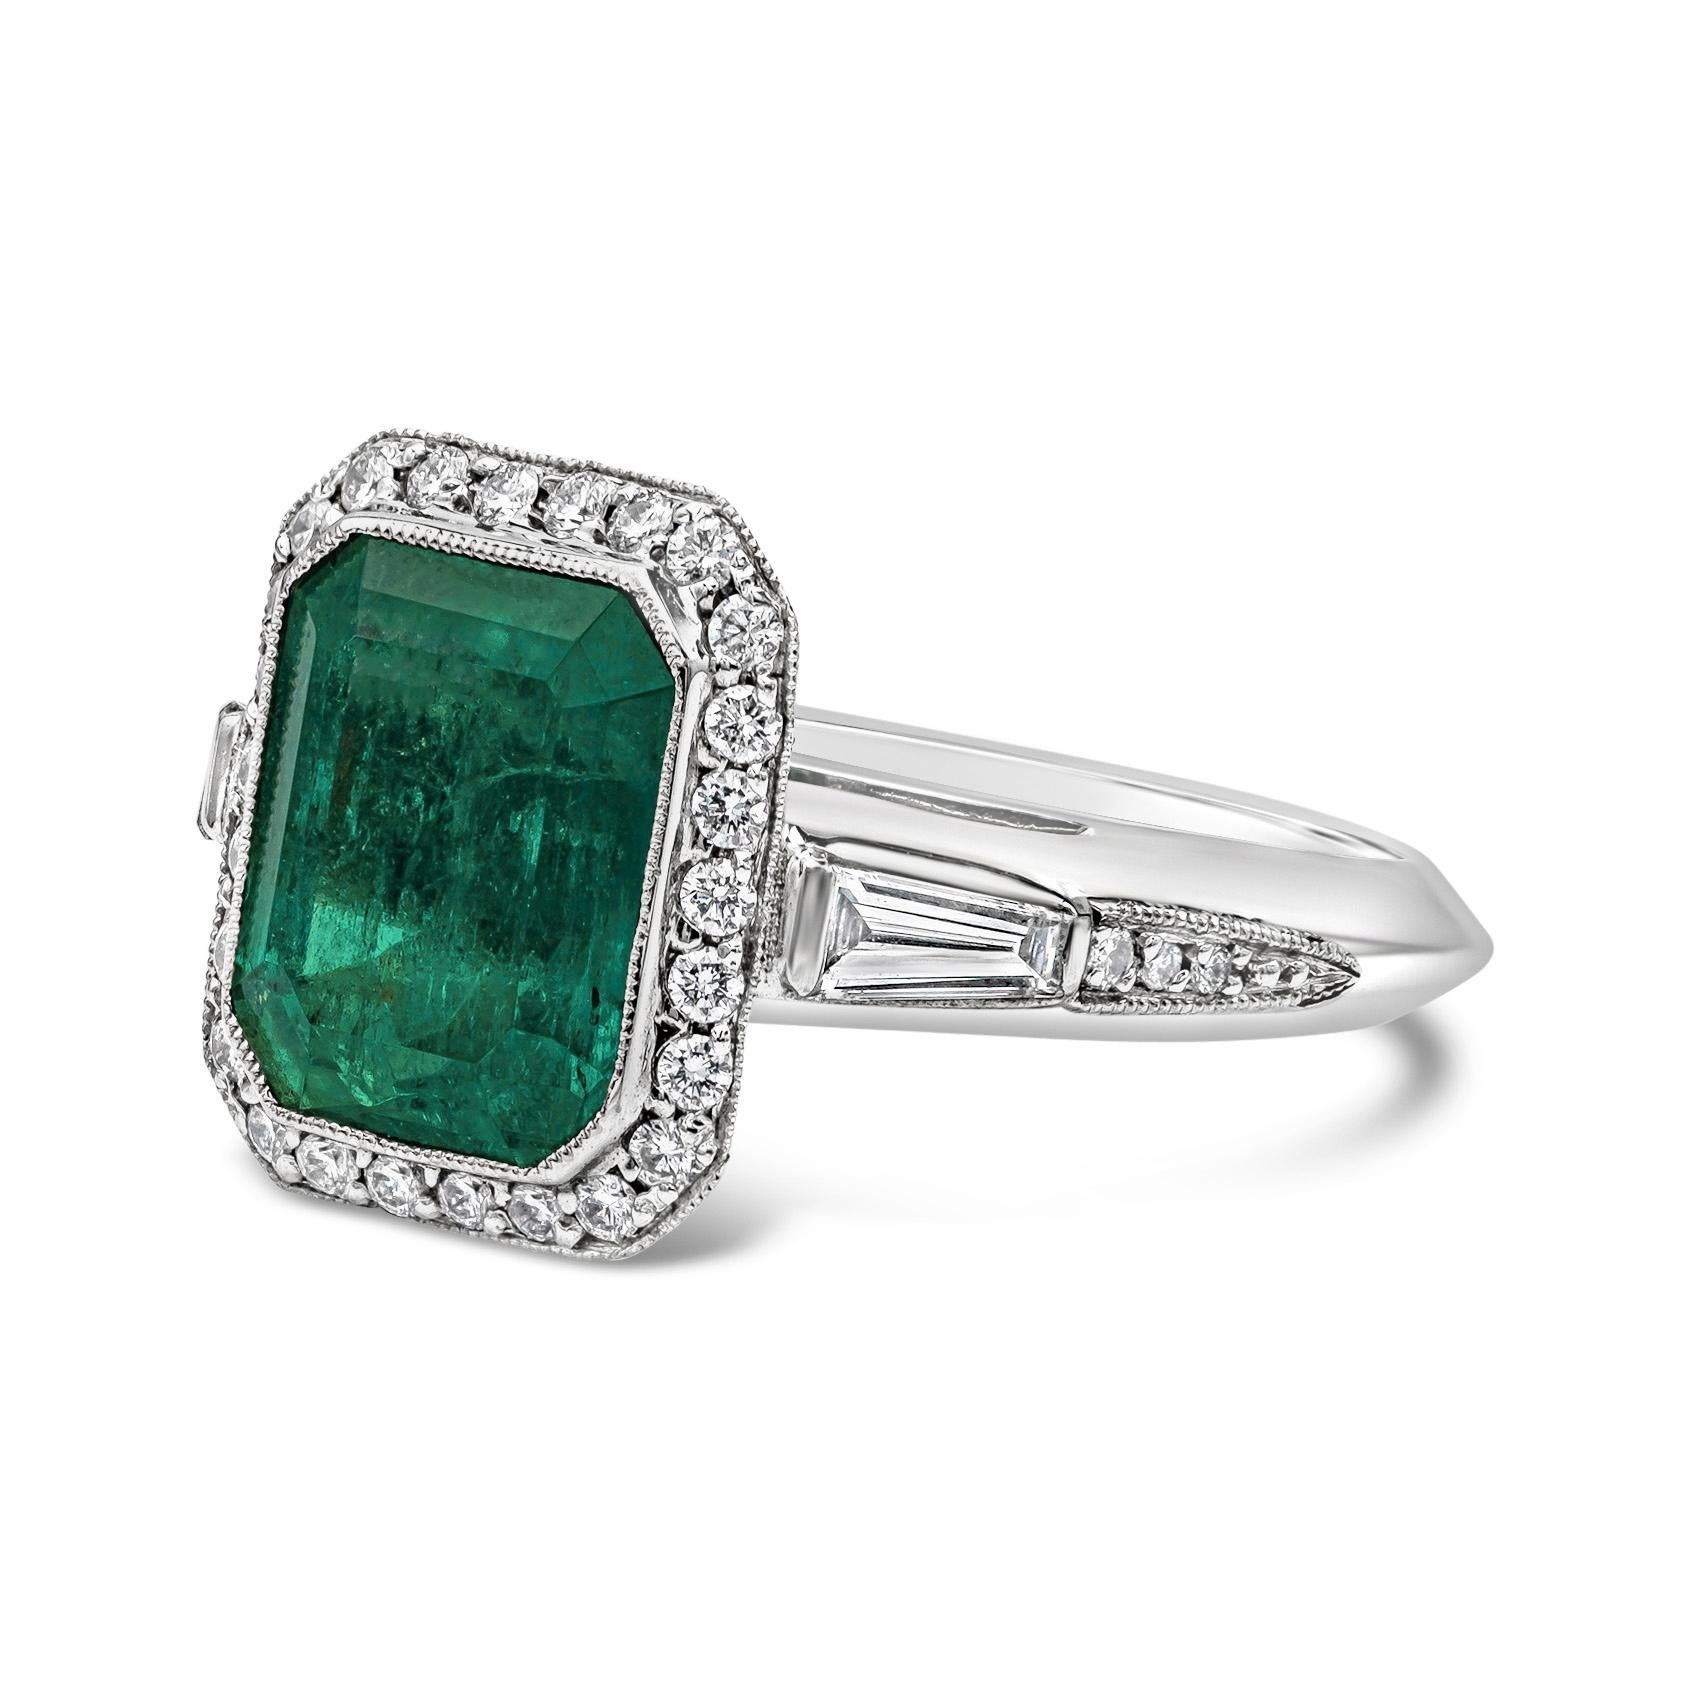 A stunning engagement ring that features an emerald cut green emerald of 4.58 carats total. This center stone is surrounded by round brilliant cut diamonds in a halo design. Accented with a tapered baguette diamond on each side of the shank. The